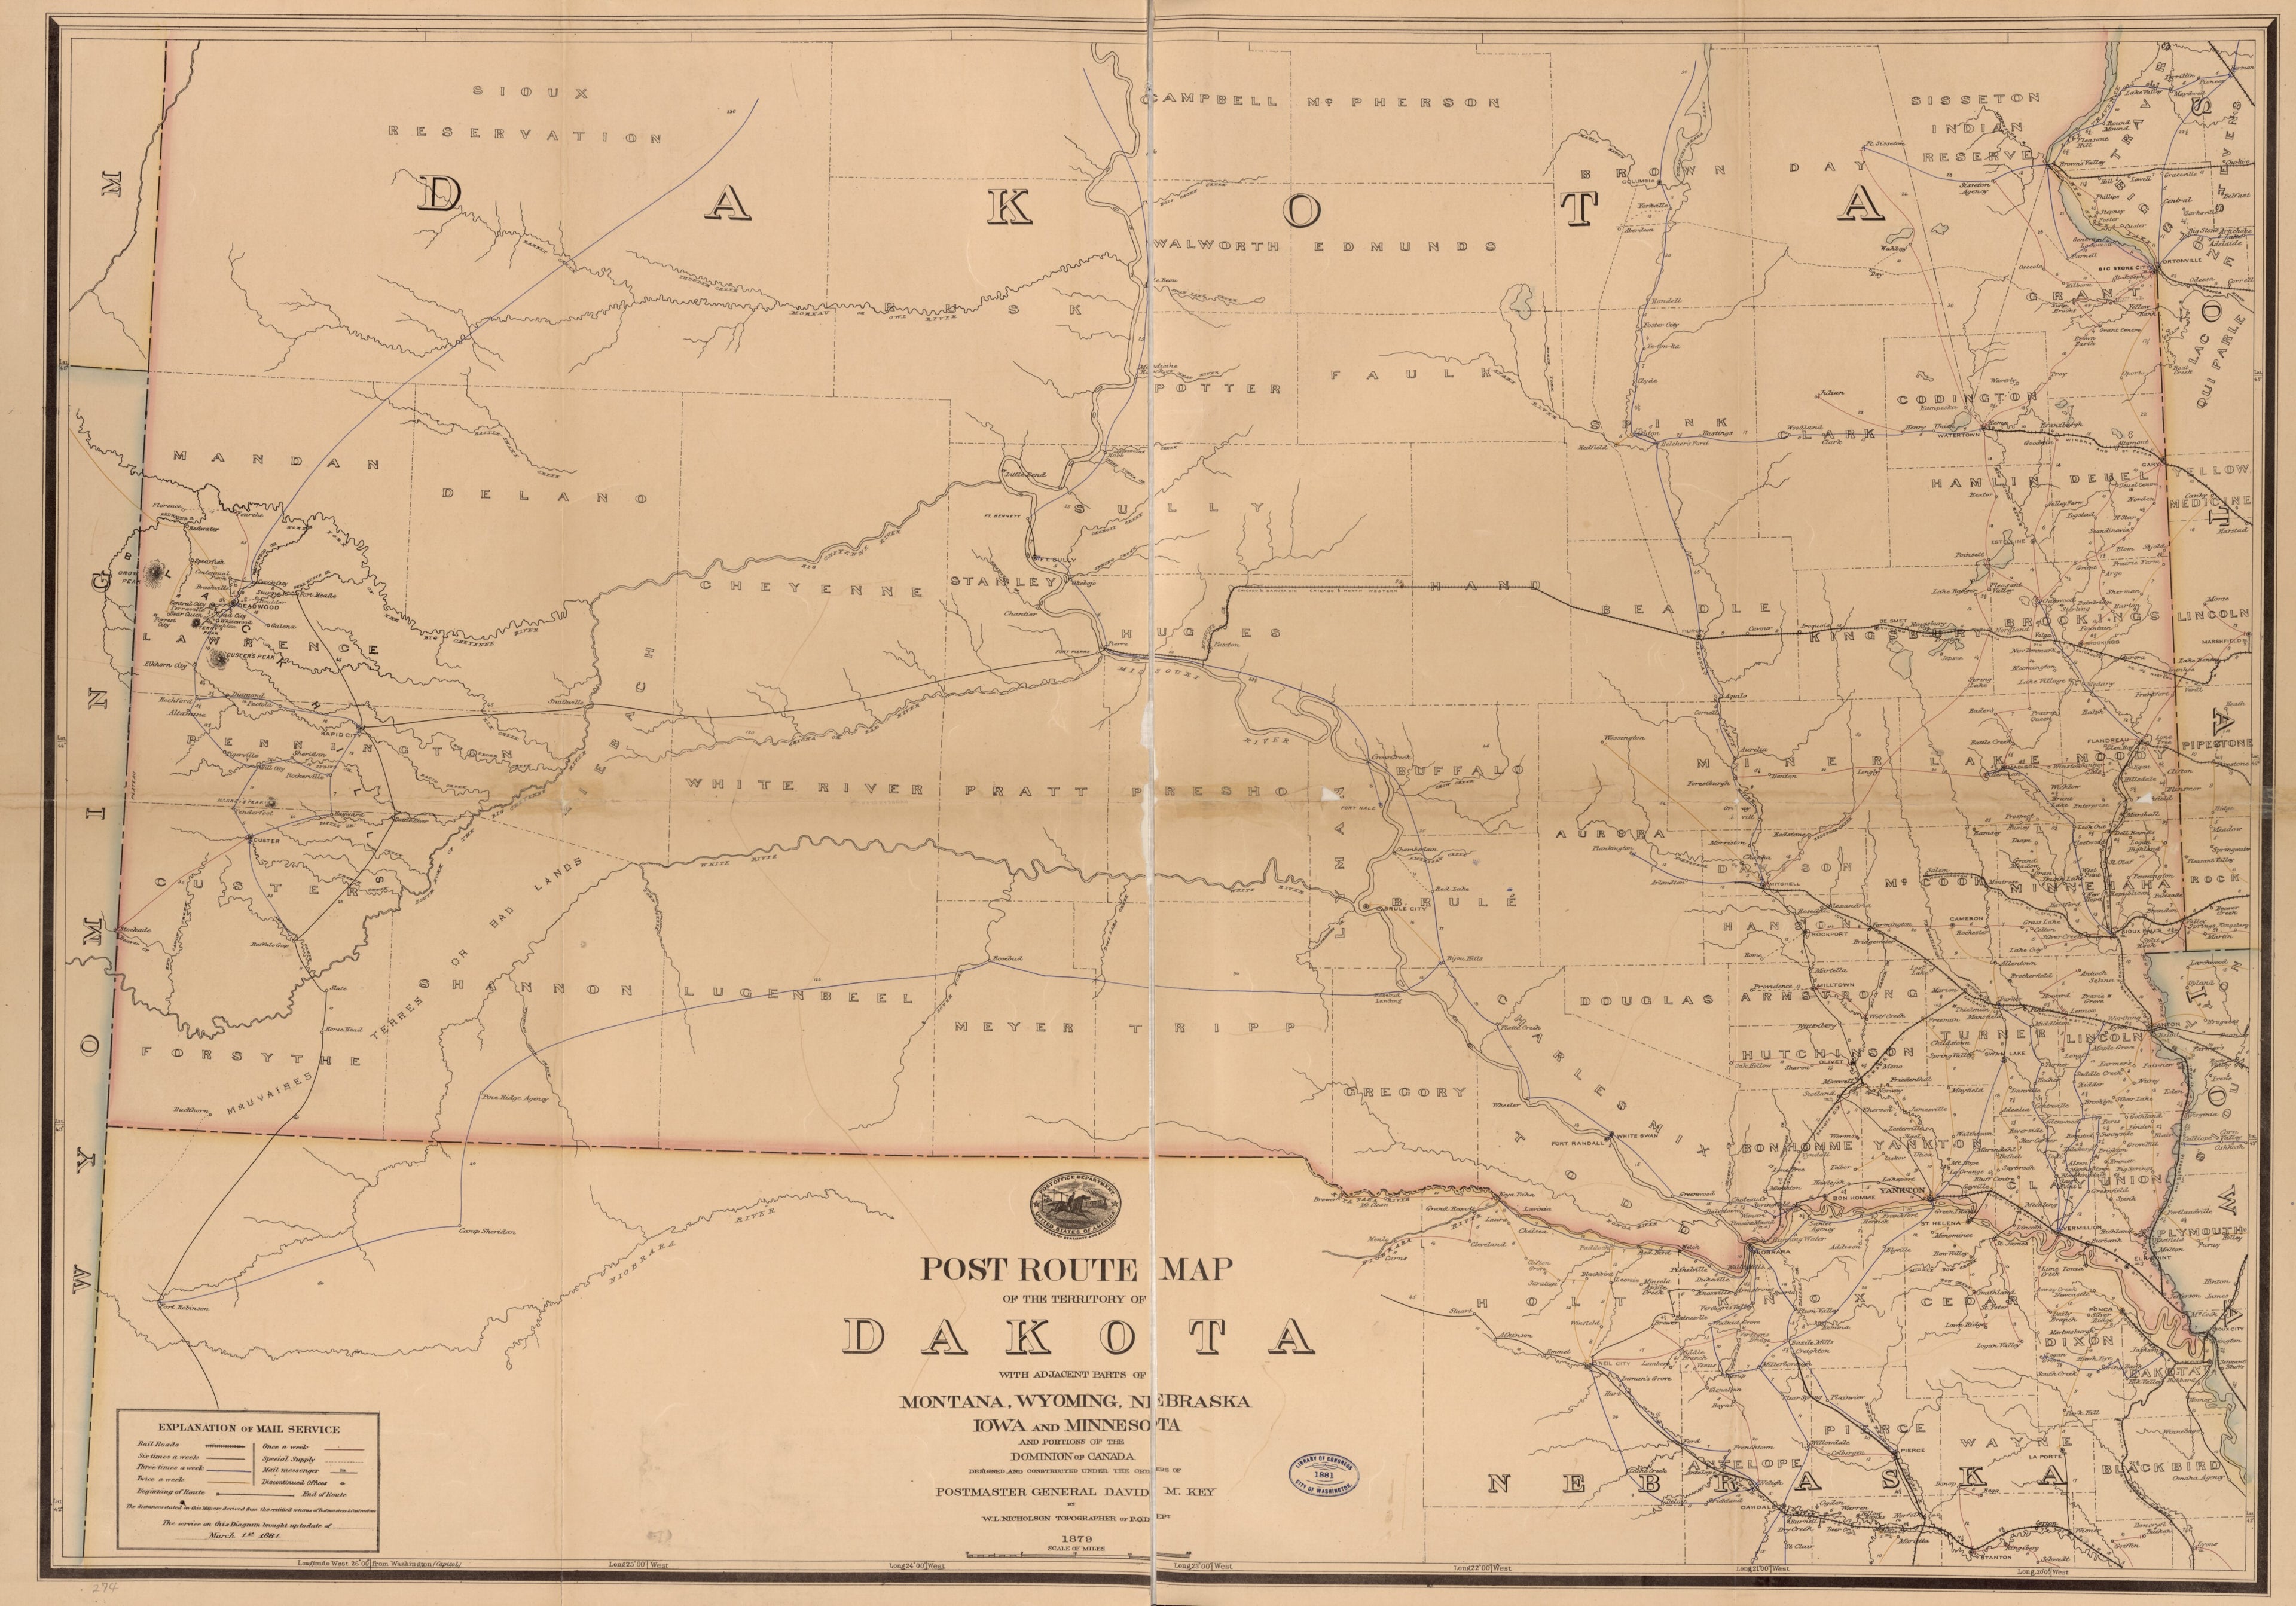 This old map of Post Route Map of the Territory of Dakota With Adjacent Parts of Montana, Wyoming, Nebraska, Iowa and Minnesota, and Portions of the Dominion of Canada from 1881 was created by W. L. Nicholson,  United States. Post Office Department in 18